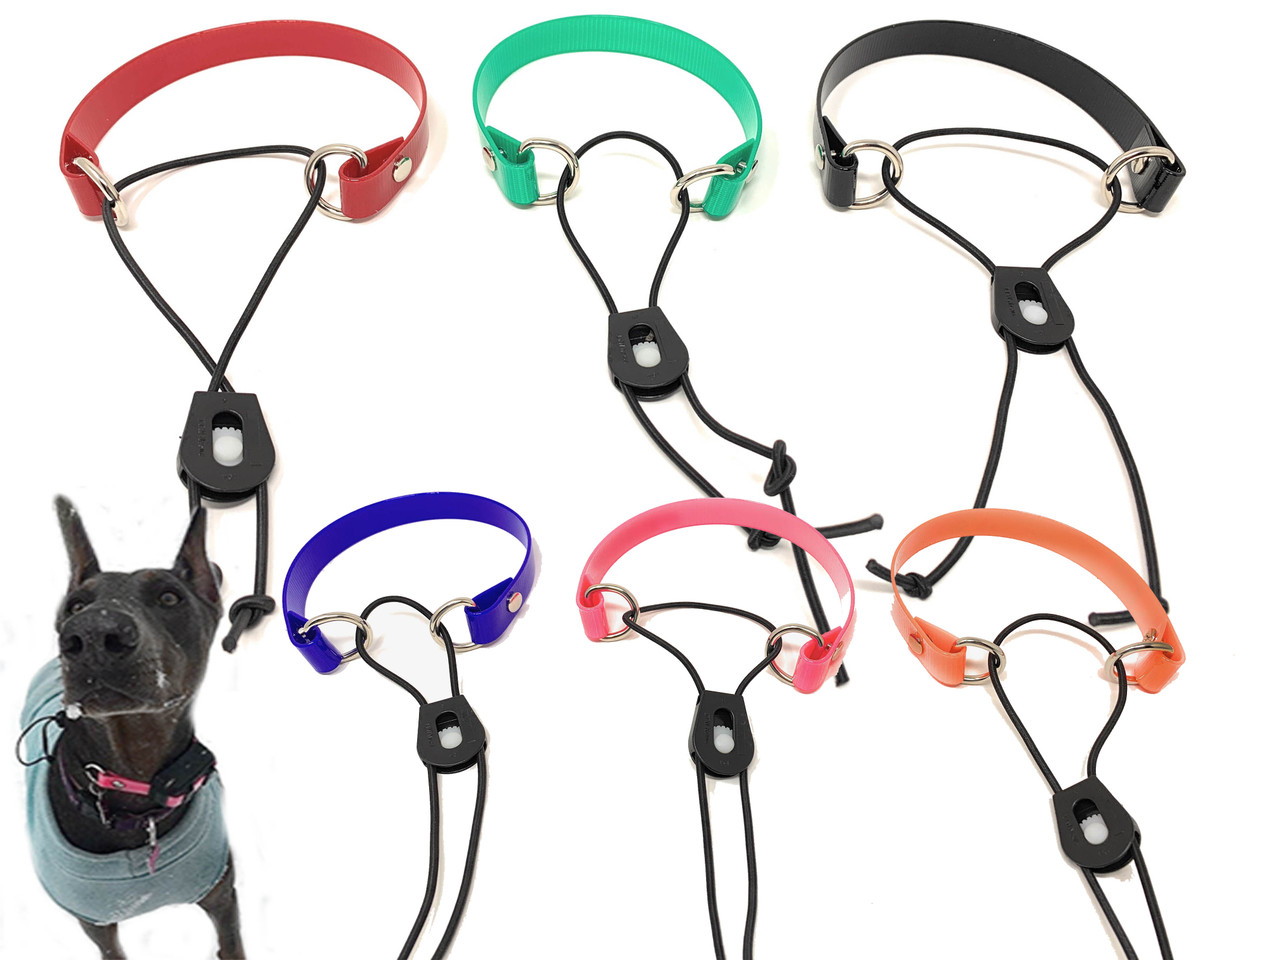 Dog (Pet) Harness Strap Replacement - iFixit Repair Guide